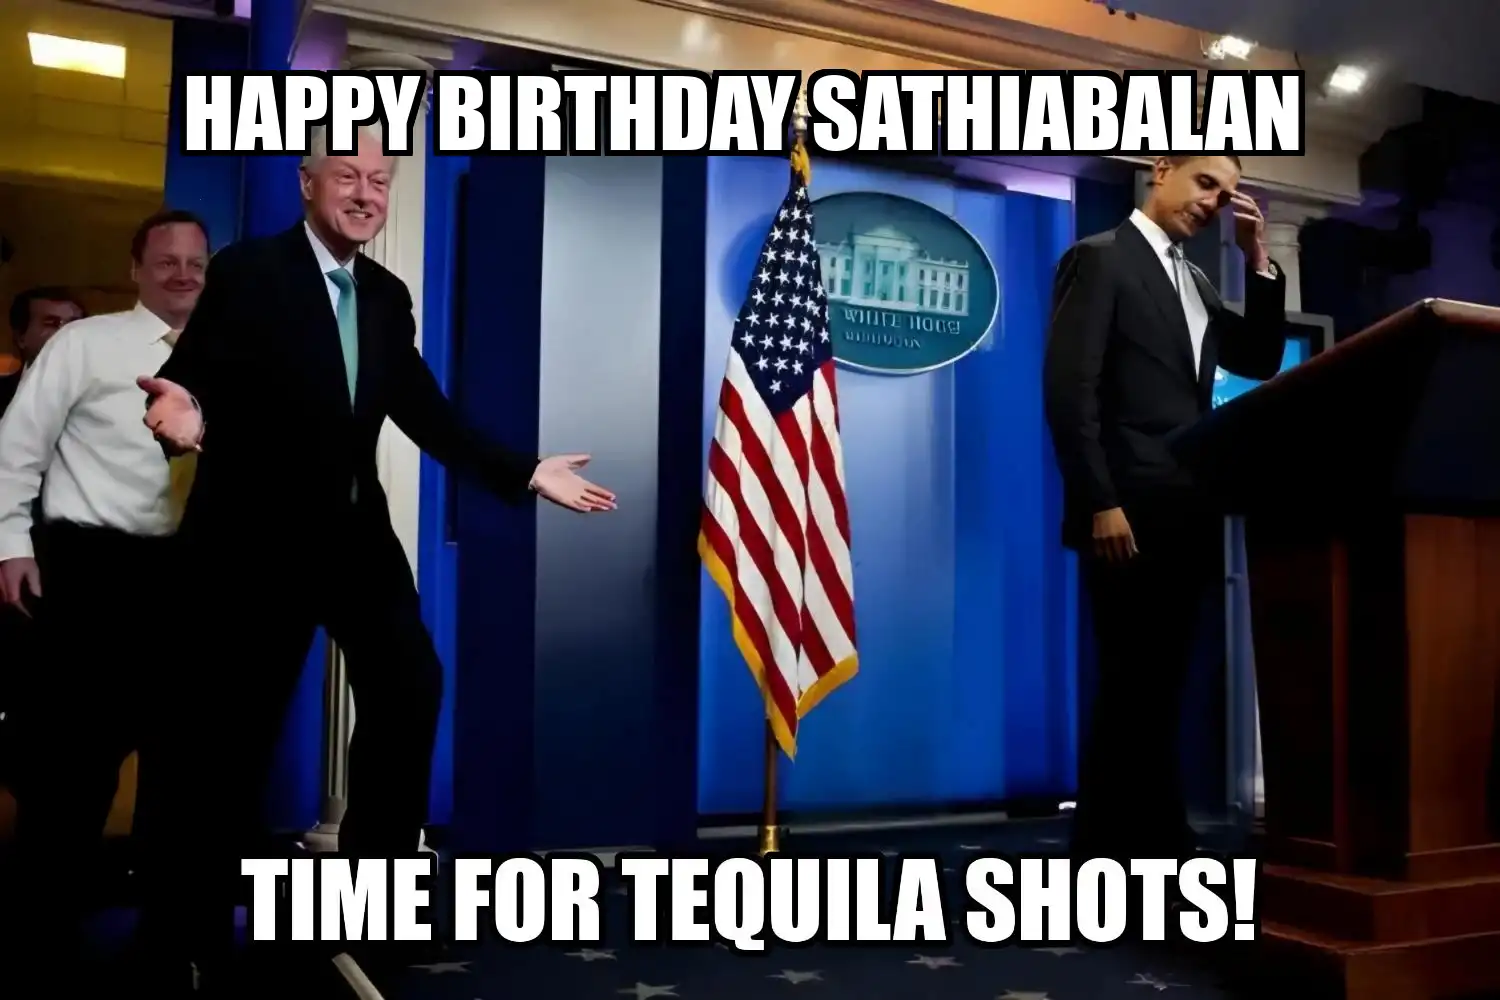 Happy Birthday Sathiabalan Time For Tequila Shots Memes